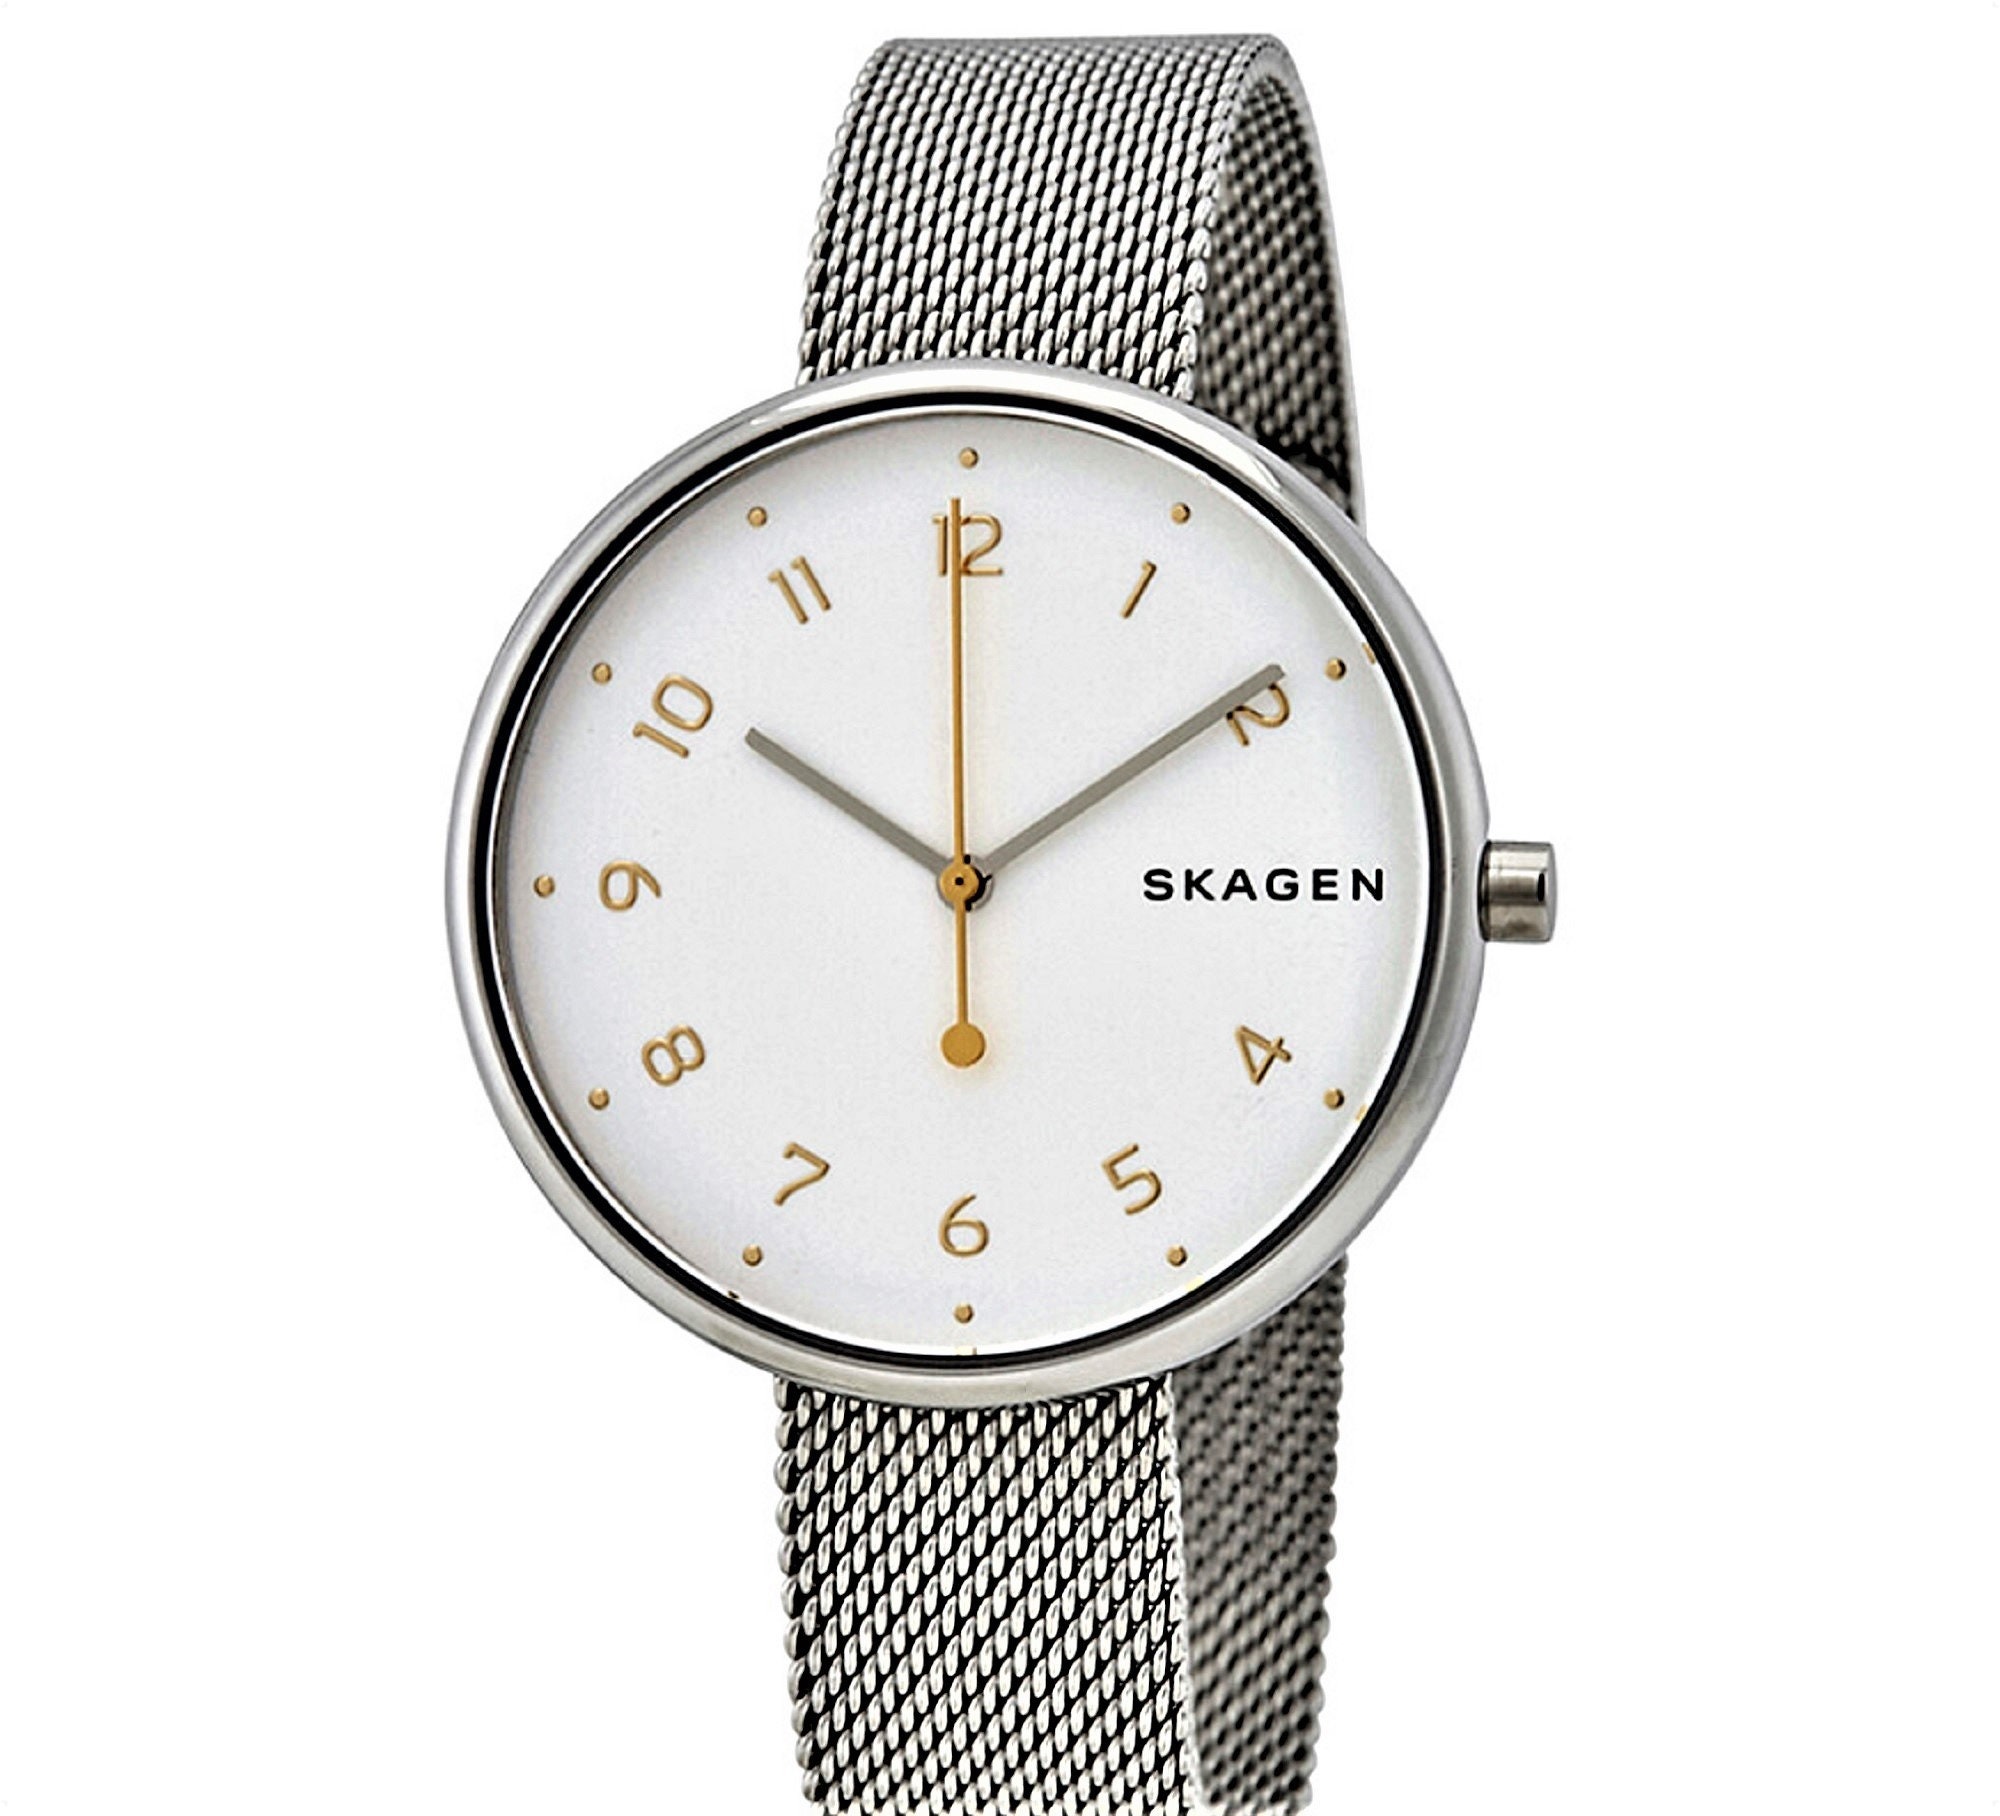 Skagen Denmark Signatur® SKW2623 Women Mesh Band Watch. Mint in Box,  Mineral Crystal, WR 5 ATM, 36mm Case, 14mm Lugs, Free US Shipping.